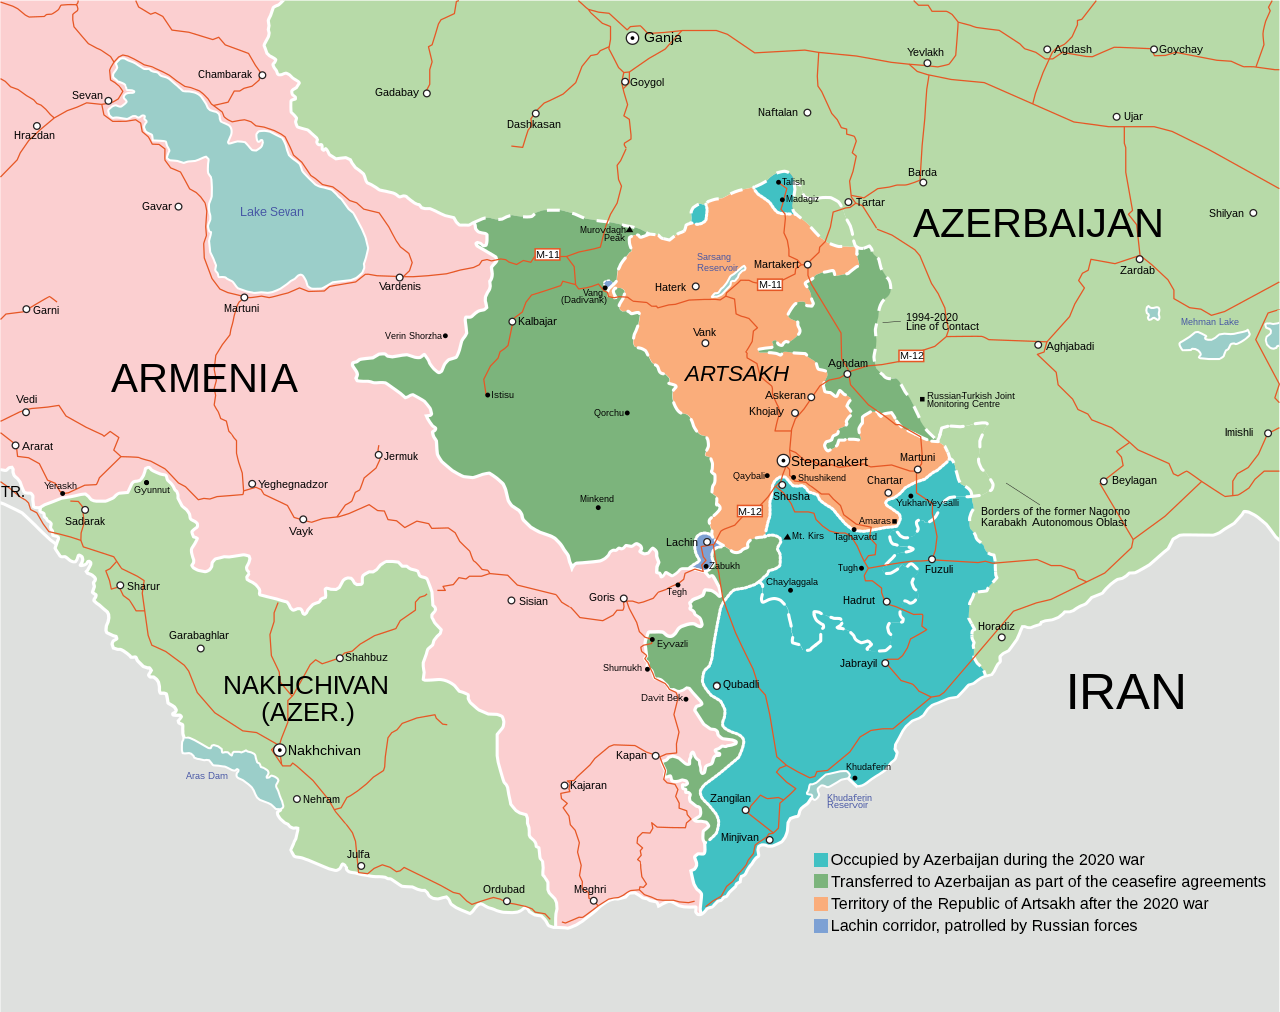 Map of Nagorno-Karabakh after the 2020 war (source: Wikipedia, adapted from: IDEA)